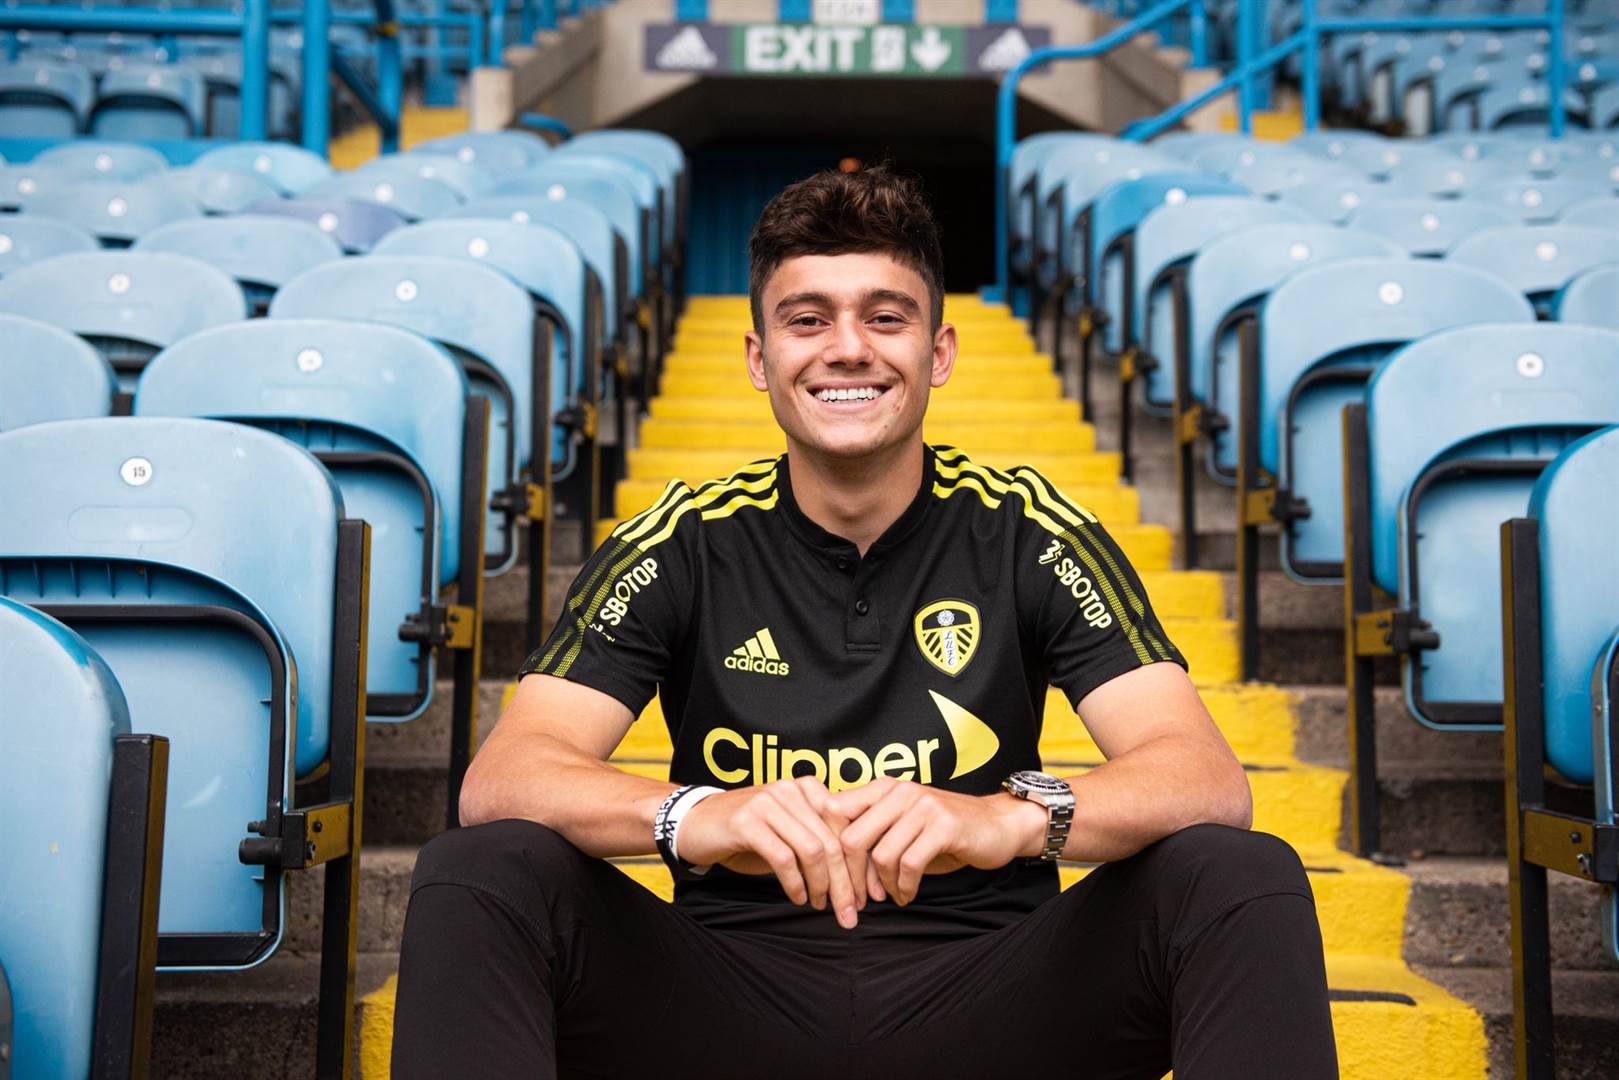 Confirmed deal - Daniel James to Leeds United from